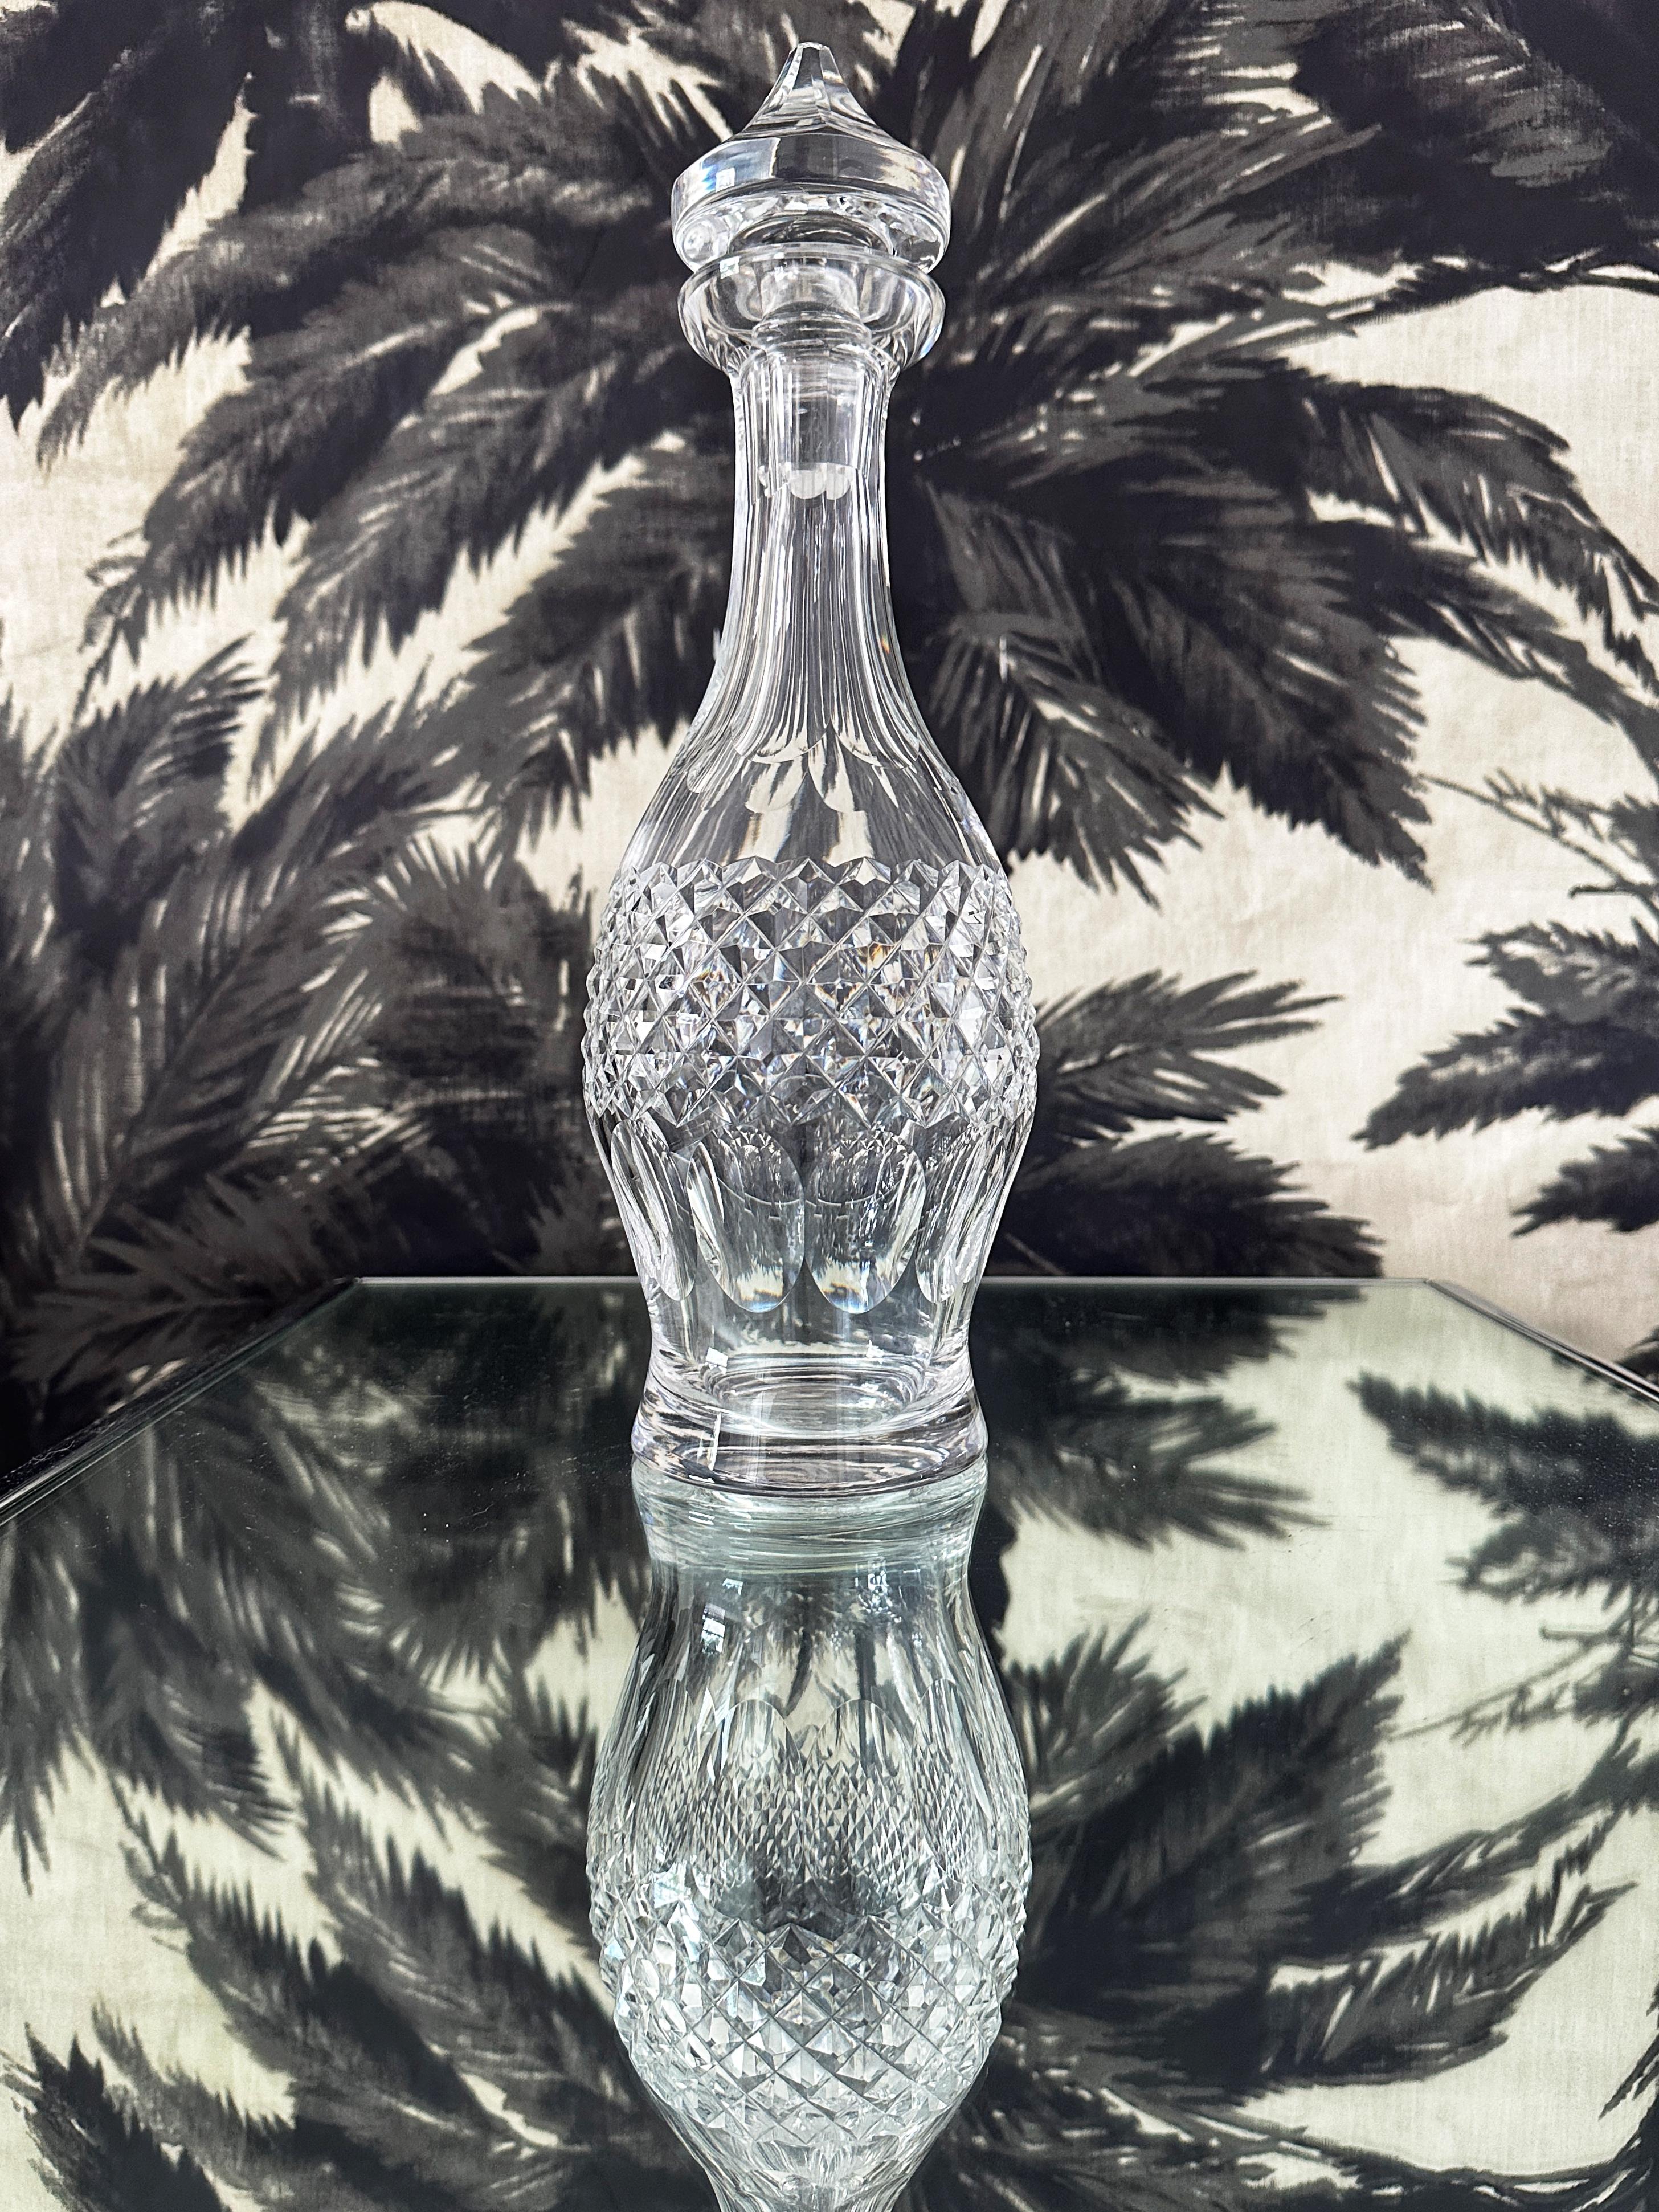 Vintage waterford crystal decanter with elegant Moorish inspired design, features a stylized genie bottle with pointed stopper. Handcrafted and mouth-blown lead crystal with brilliant prismatic diamond cuts and etched designs throughout. The